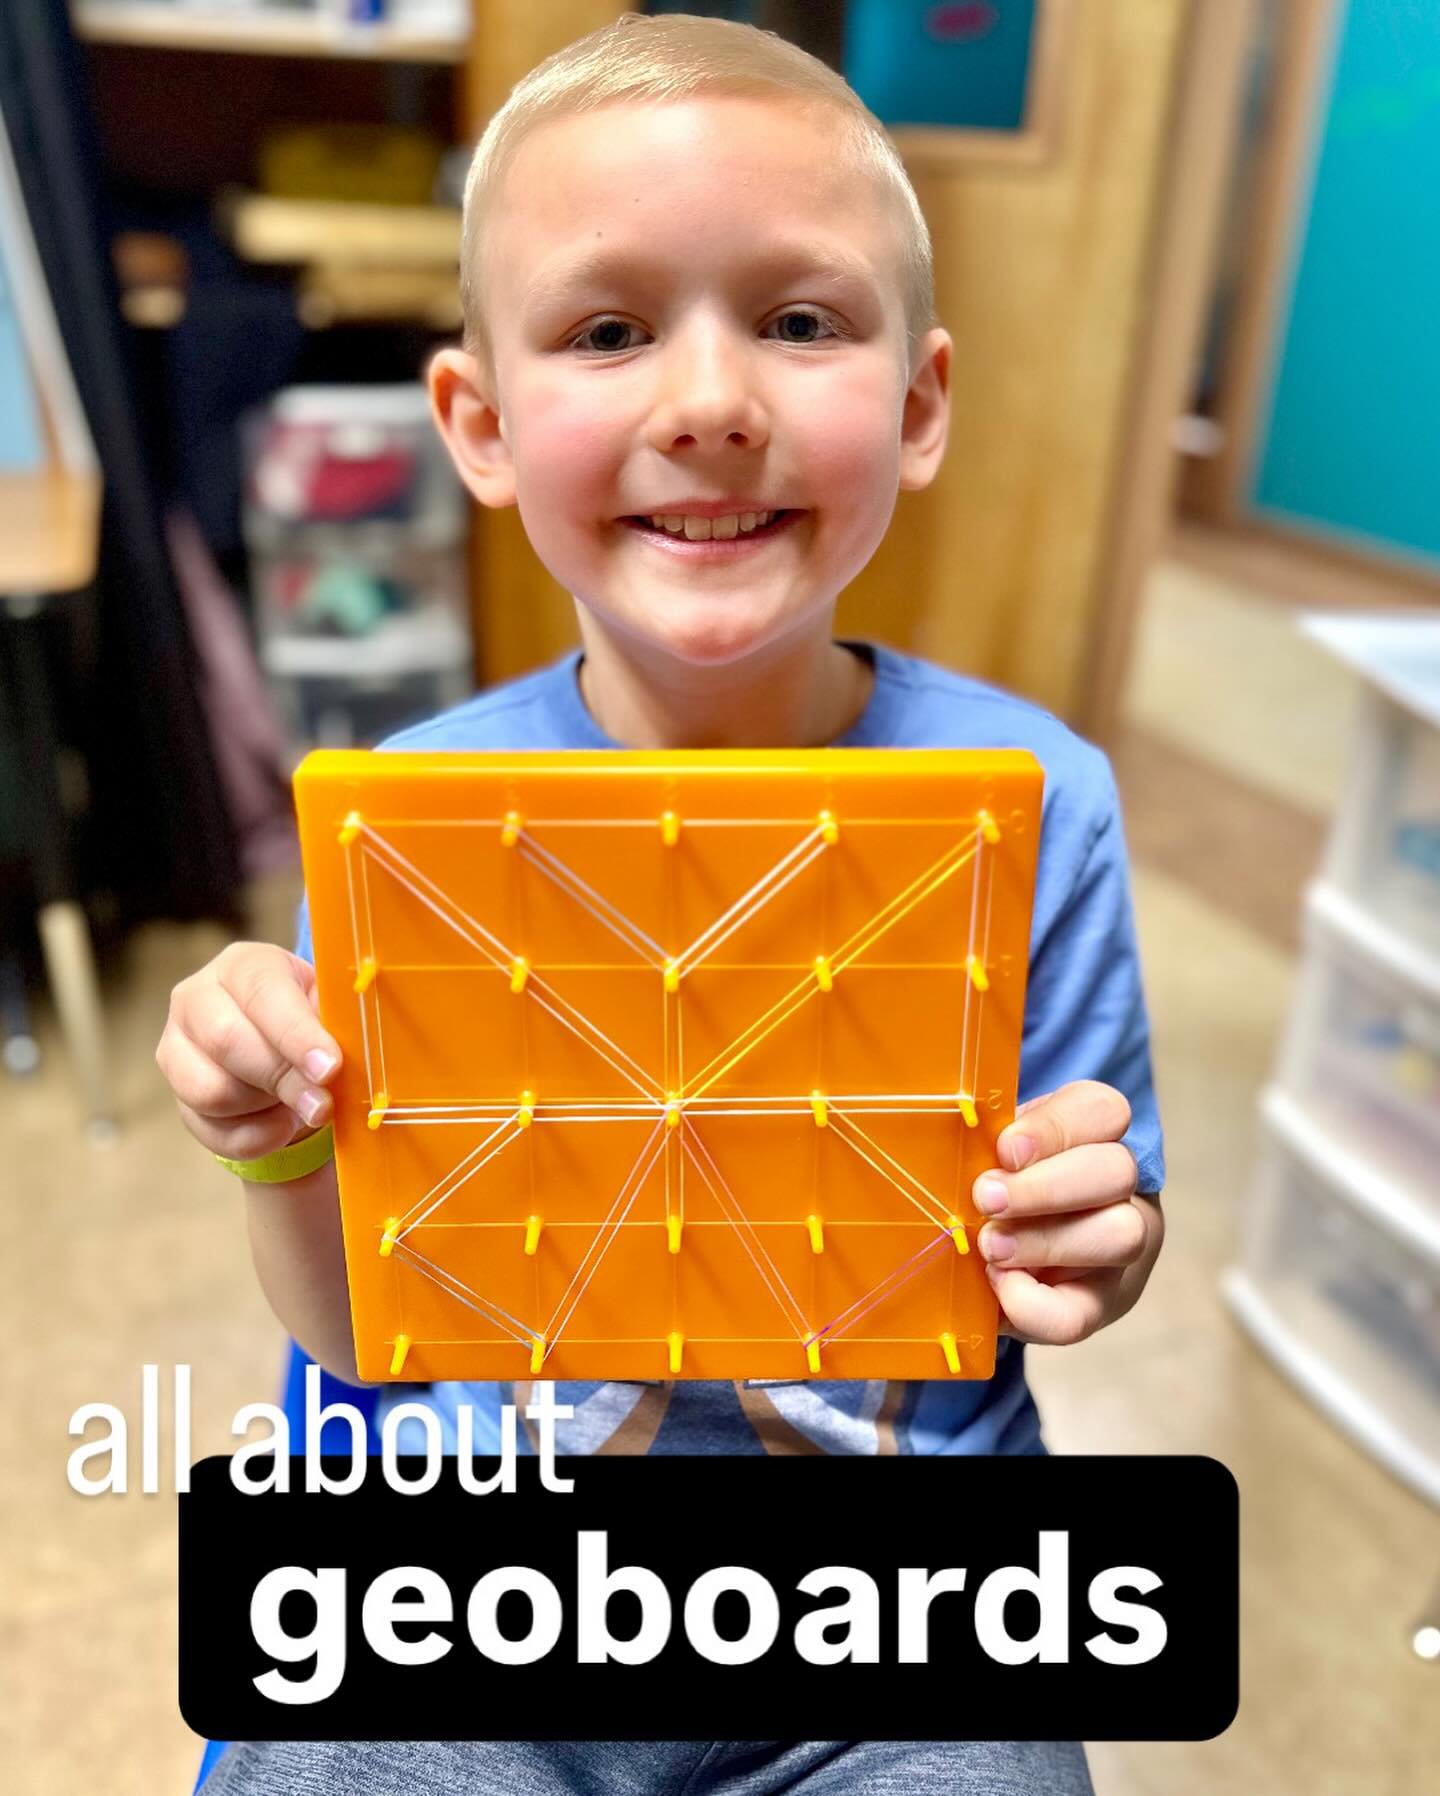 Geoboards are a fun way to work on finger strength, fine motor coordination, visual motor coordination, and even bilateral coordination. All you need are rubber bands or hair ties, a peg board, and a picture to make! You can either copy a picture or 